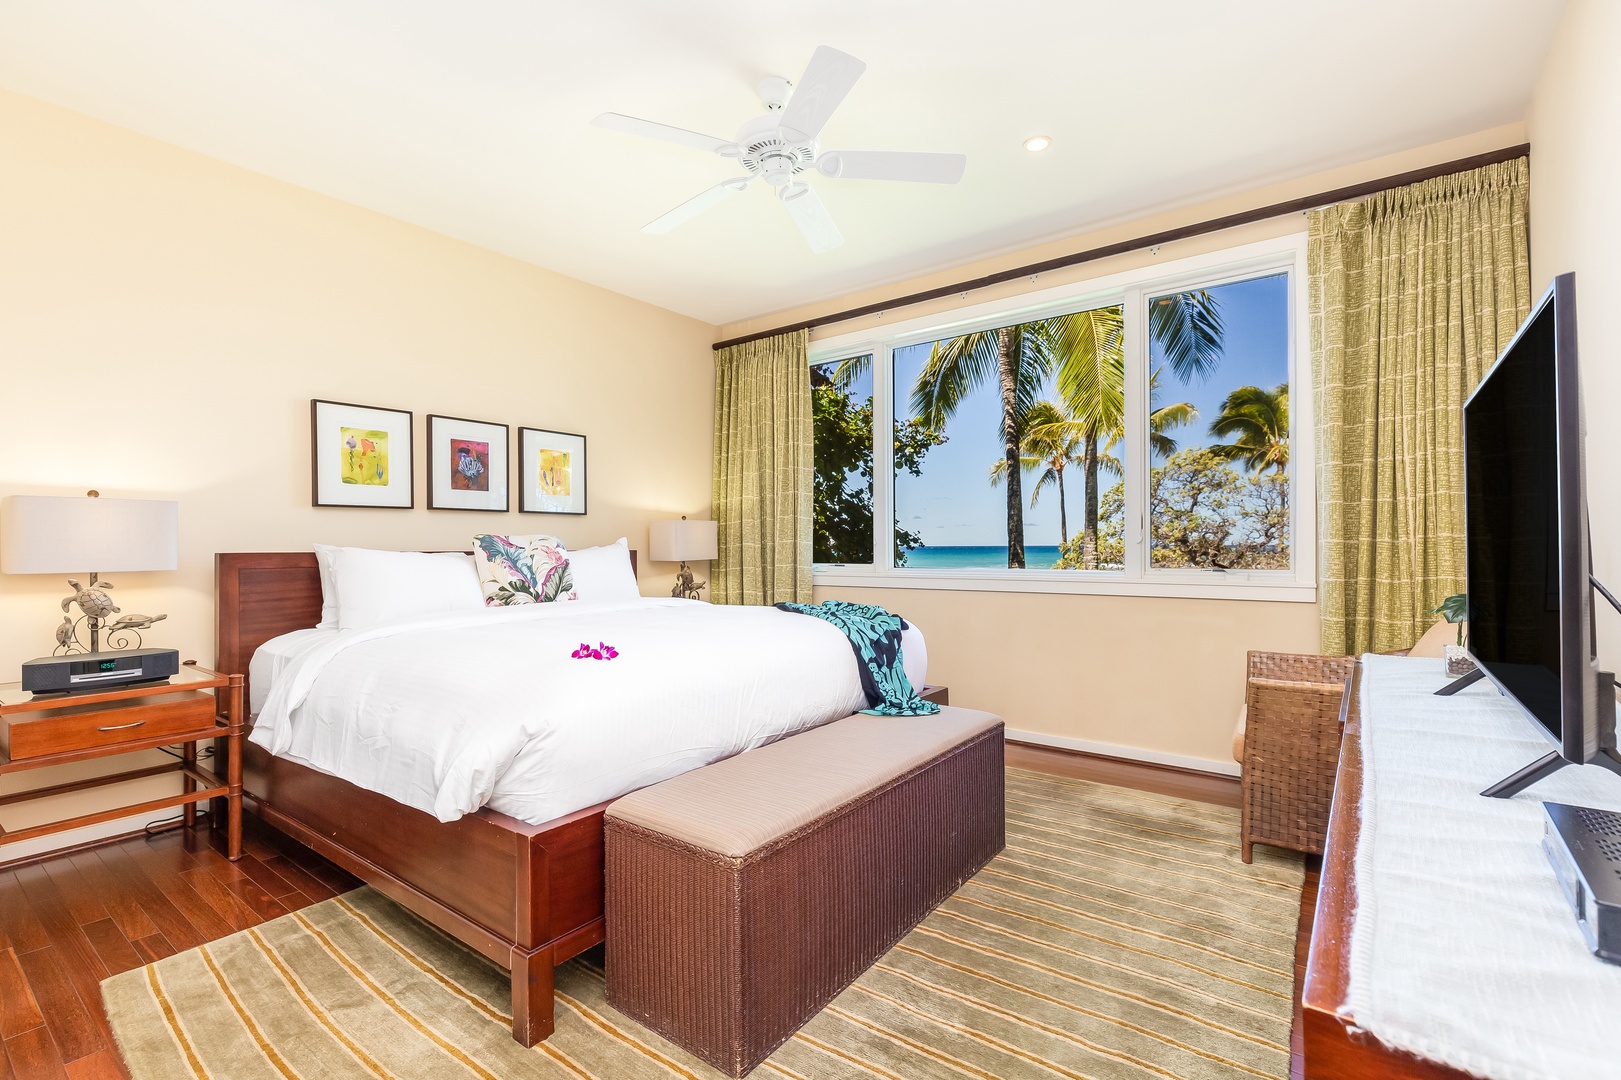 Kahuku Vacation Rentals, Turtle Bay Villas 201 - Primary Suite with King bed